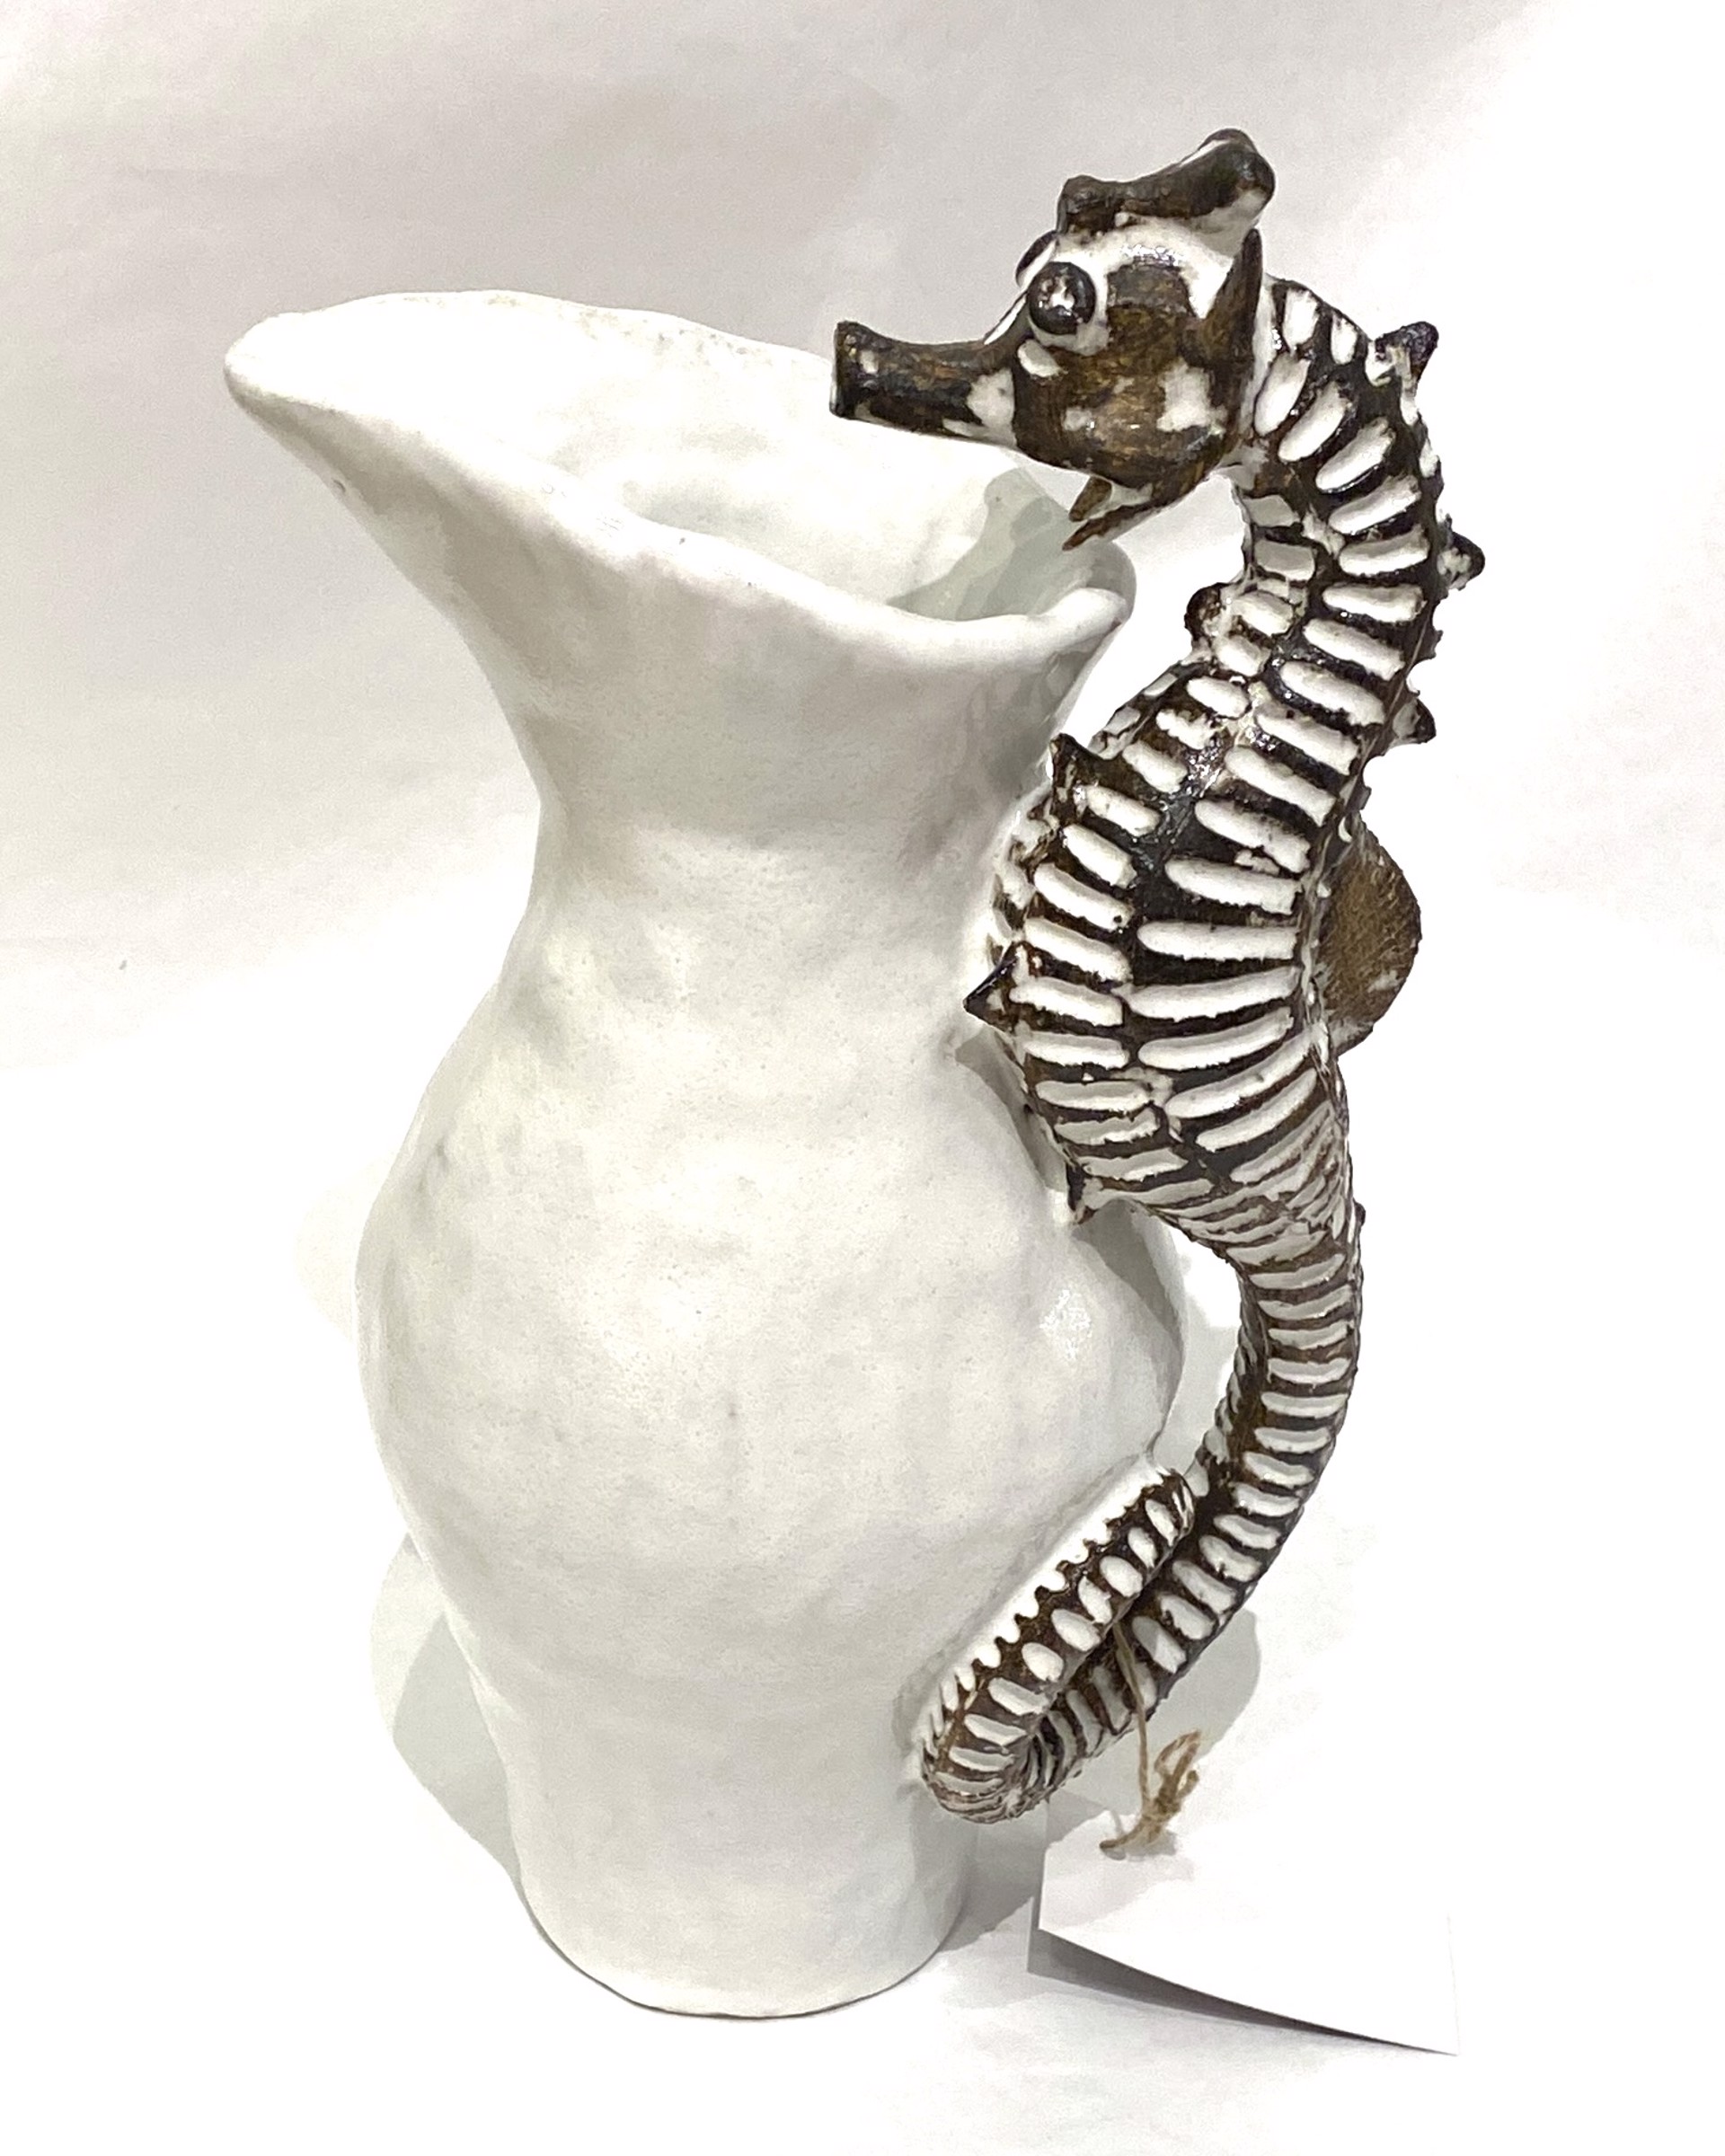 Seahorse Pitcher SG23-8 by Shayne Greco